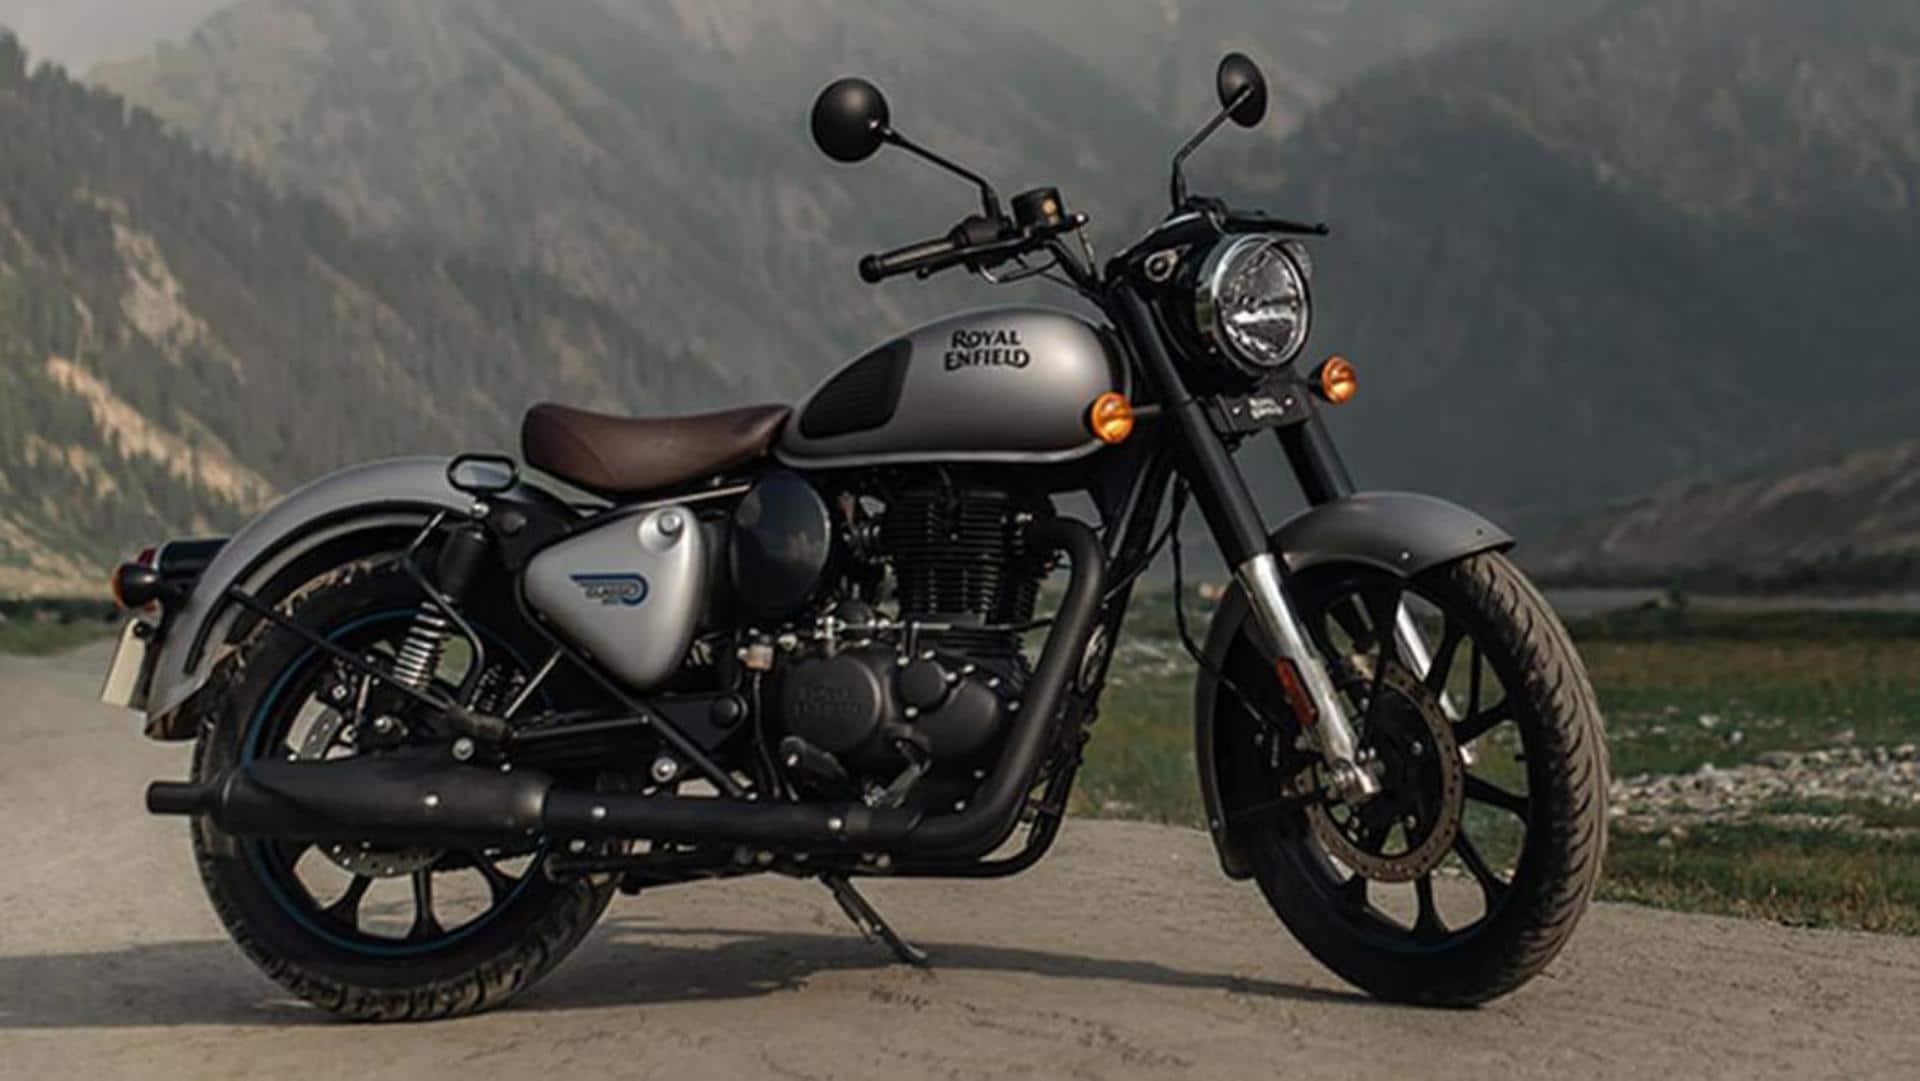 Royal Enfield Super Meteor 650 debuts tomorrow: What to expect?